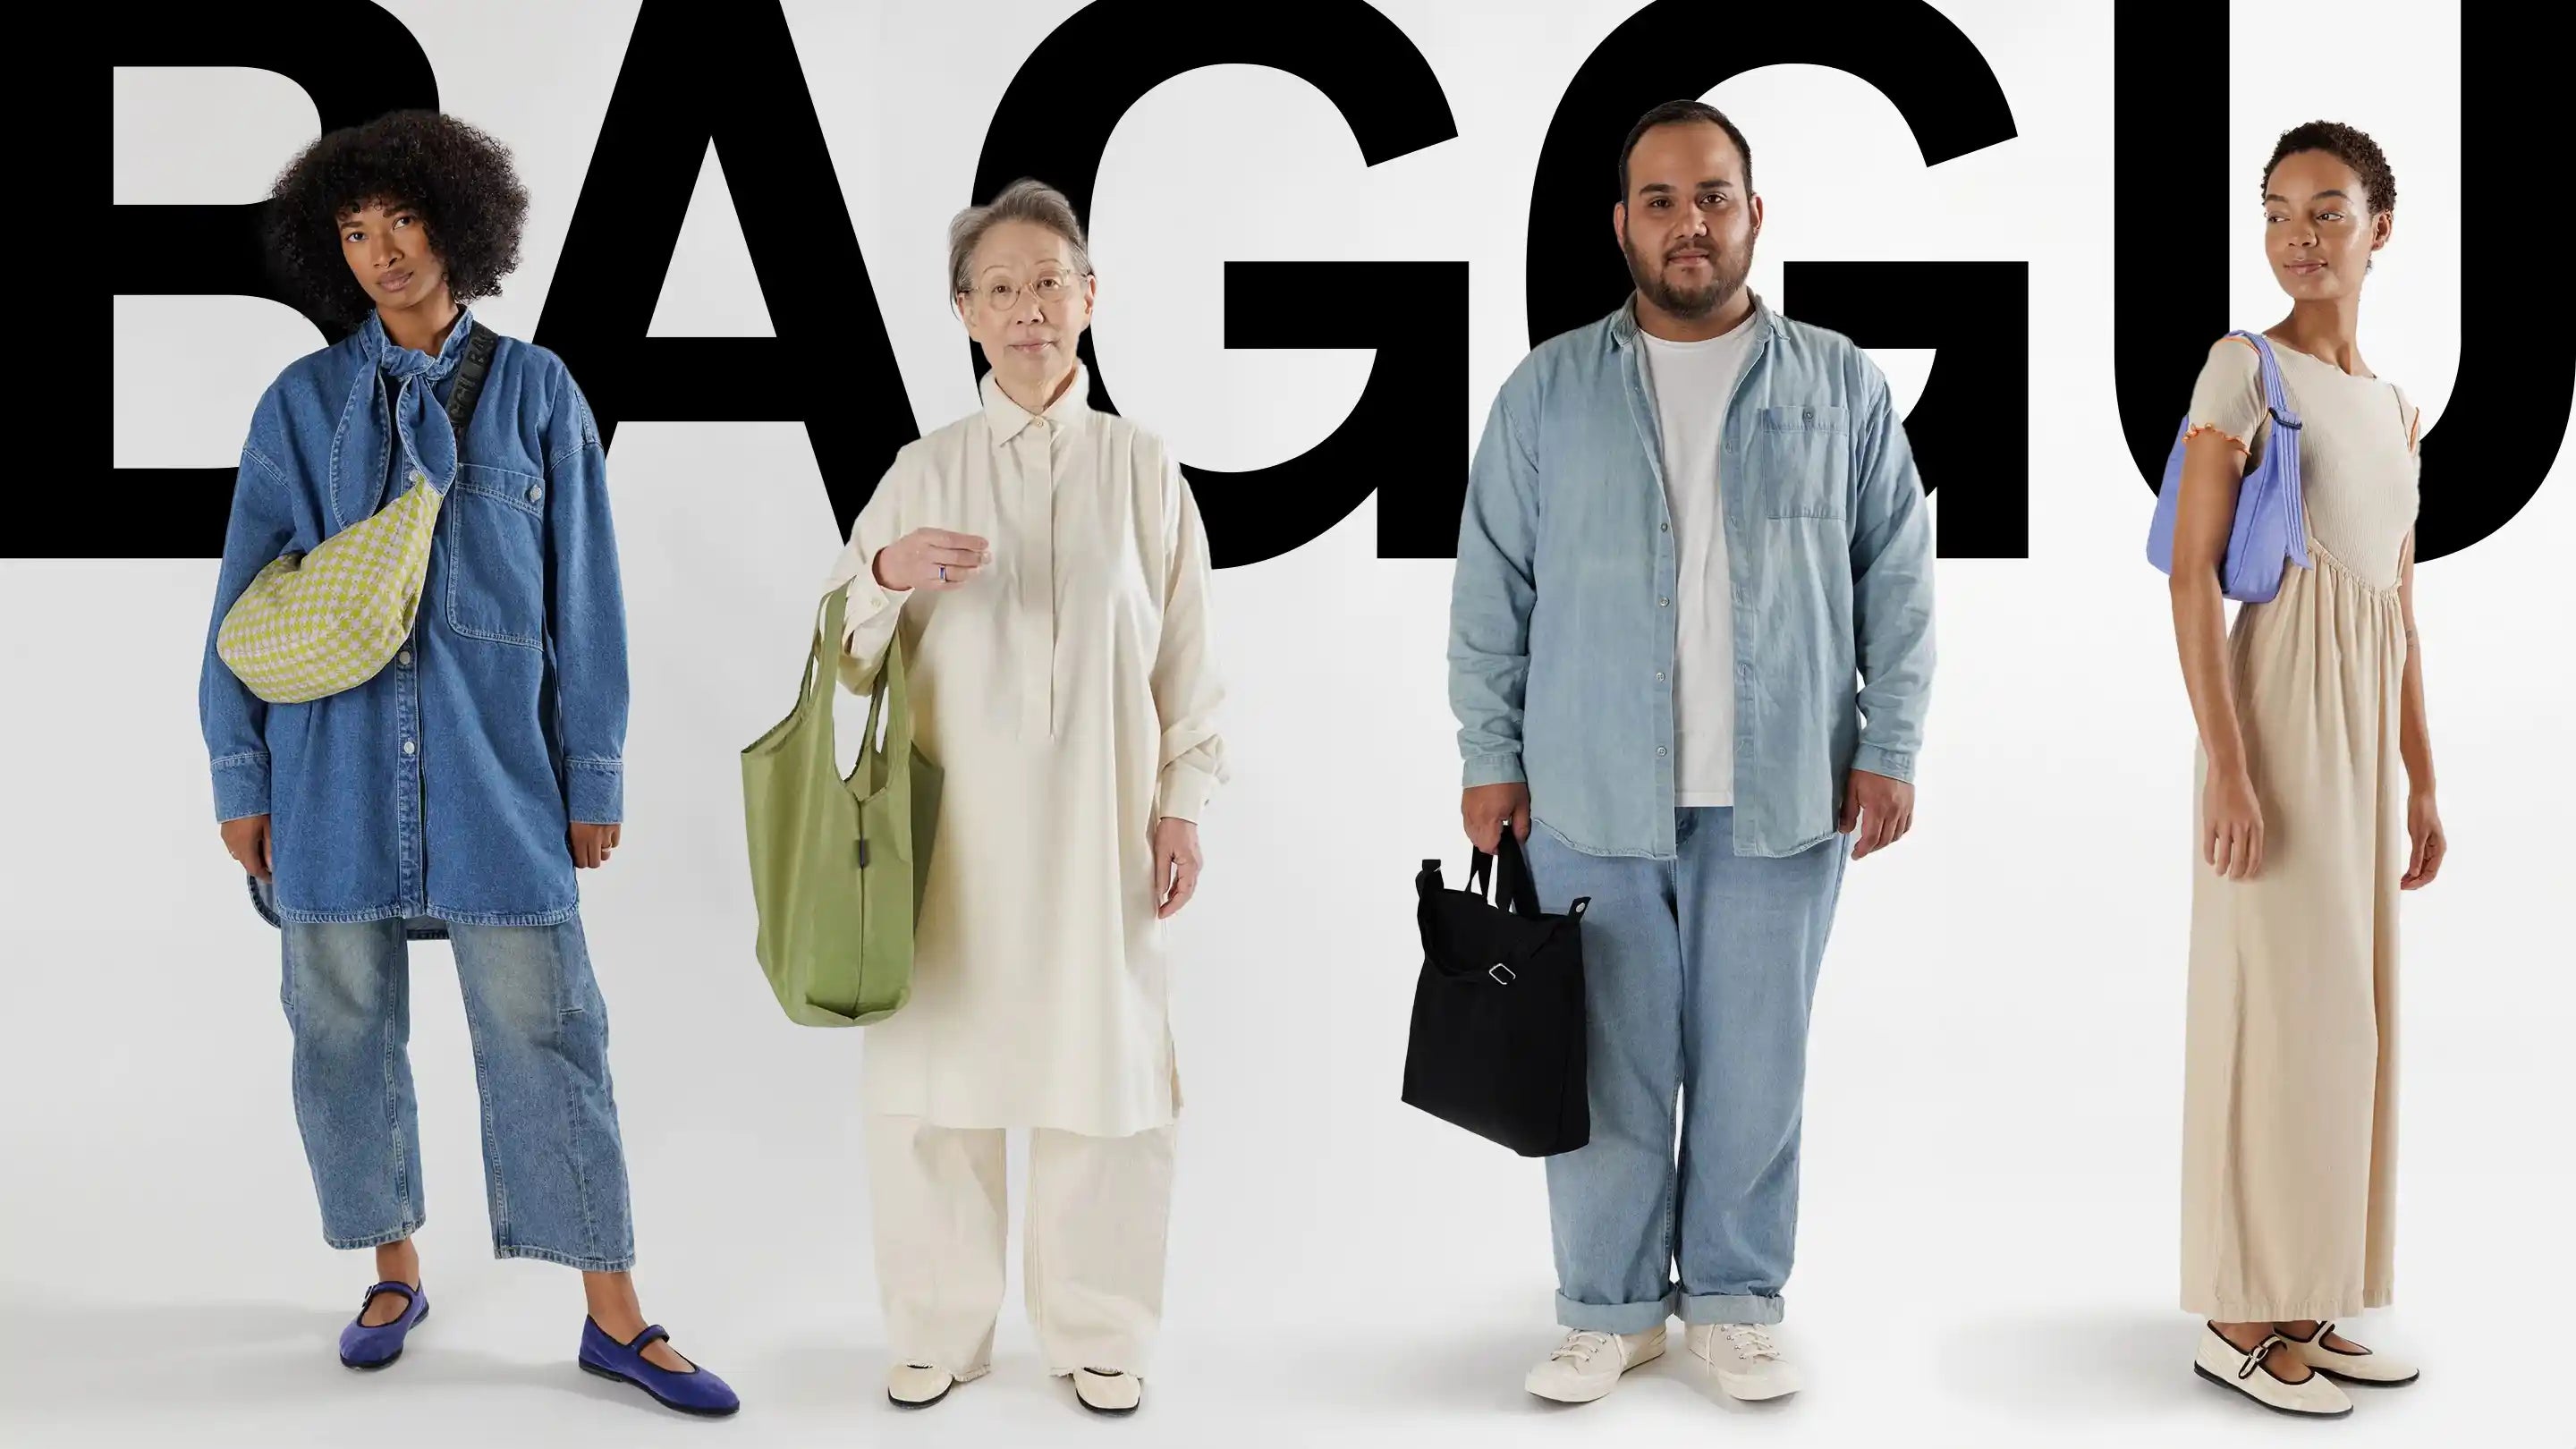 A black woman, an older asian woman, a man, and a black woman standing with bags. The word BAGGU is seen behind them